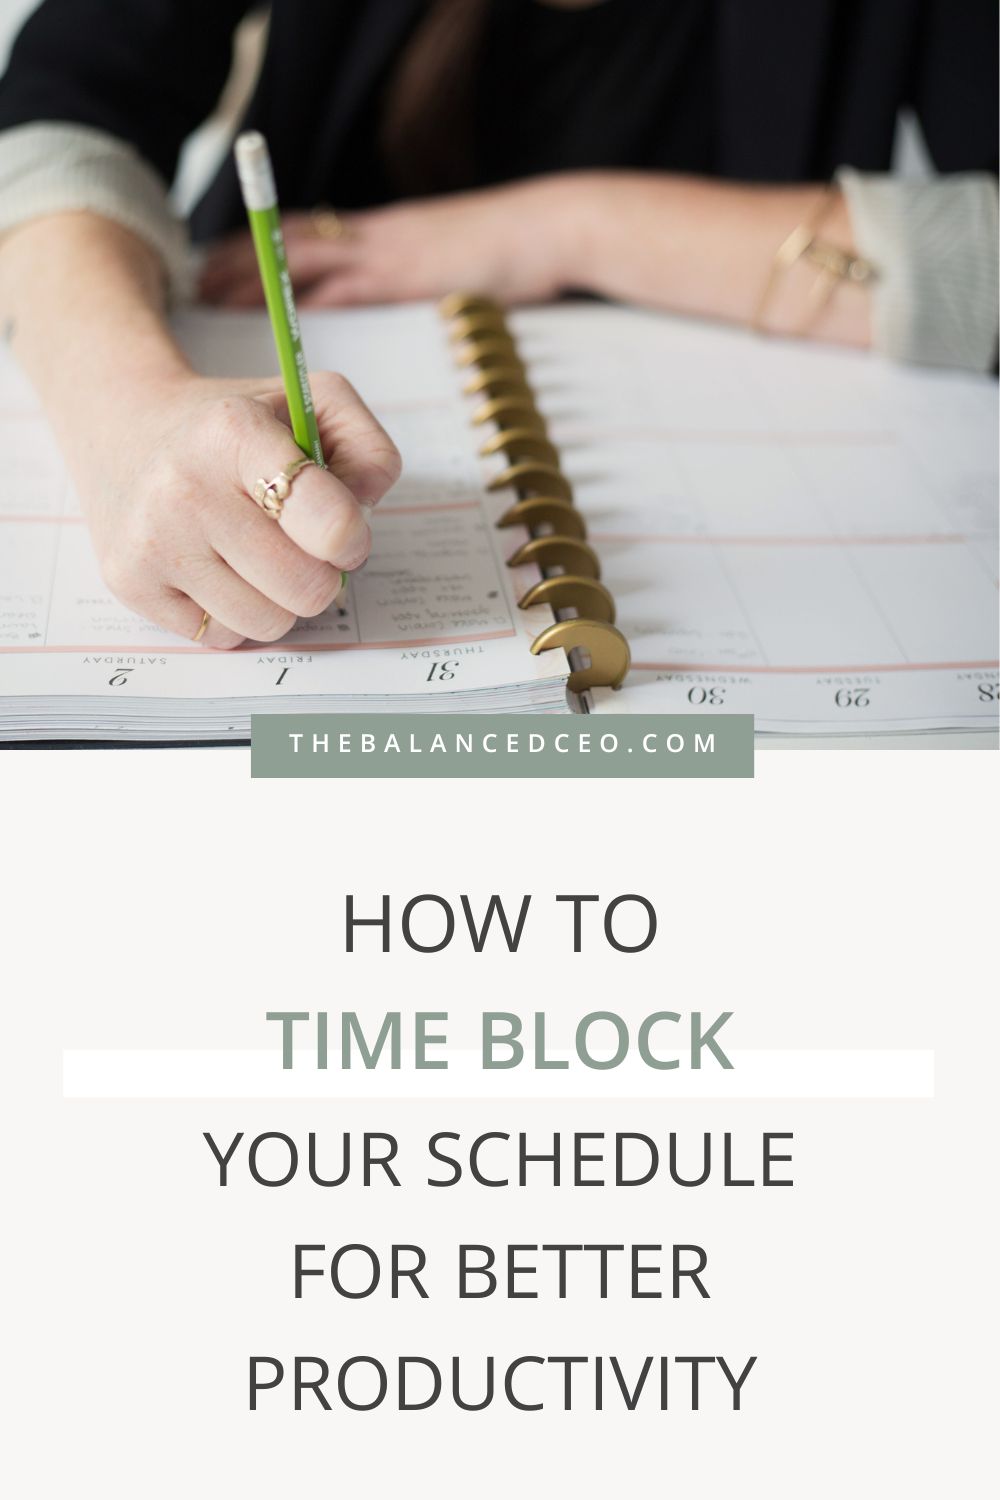 How to Time Block Your Schedule for Better Productivity